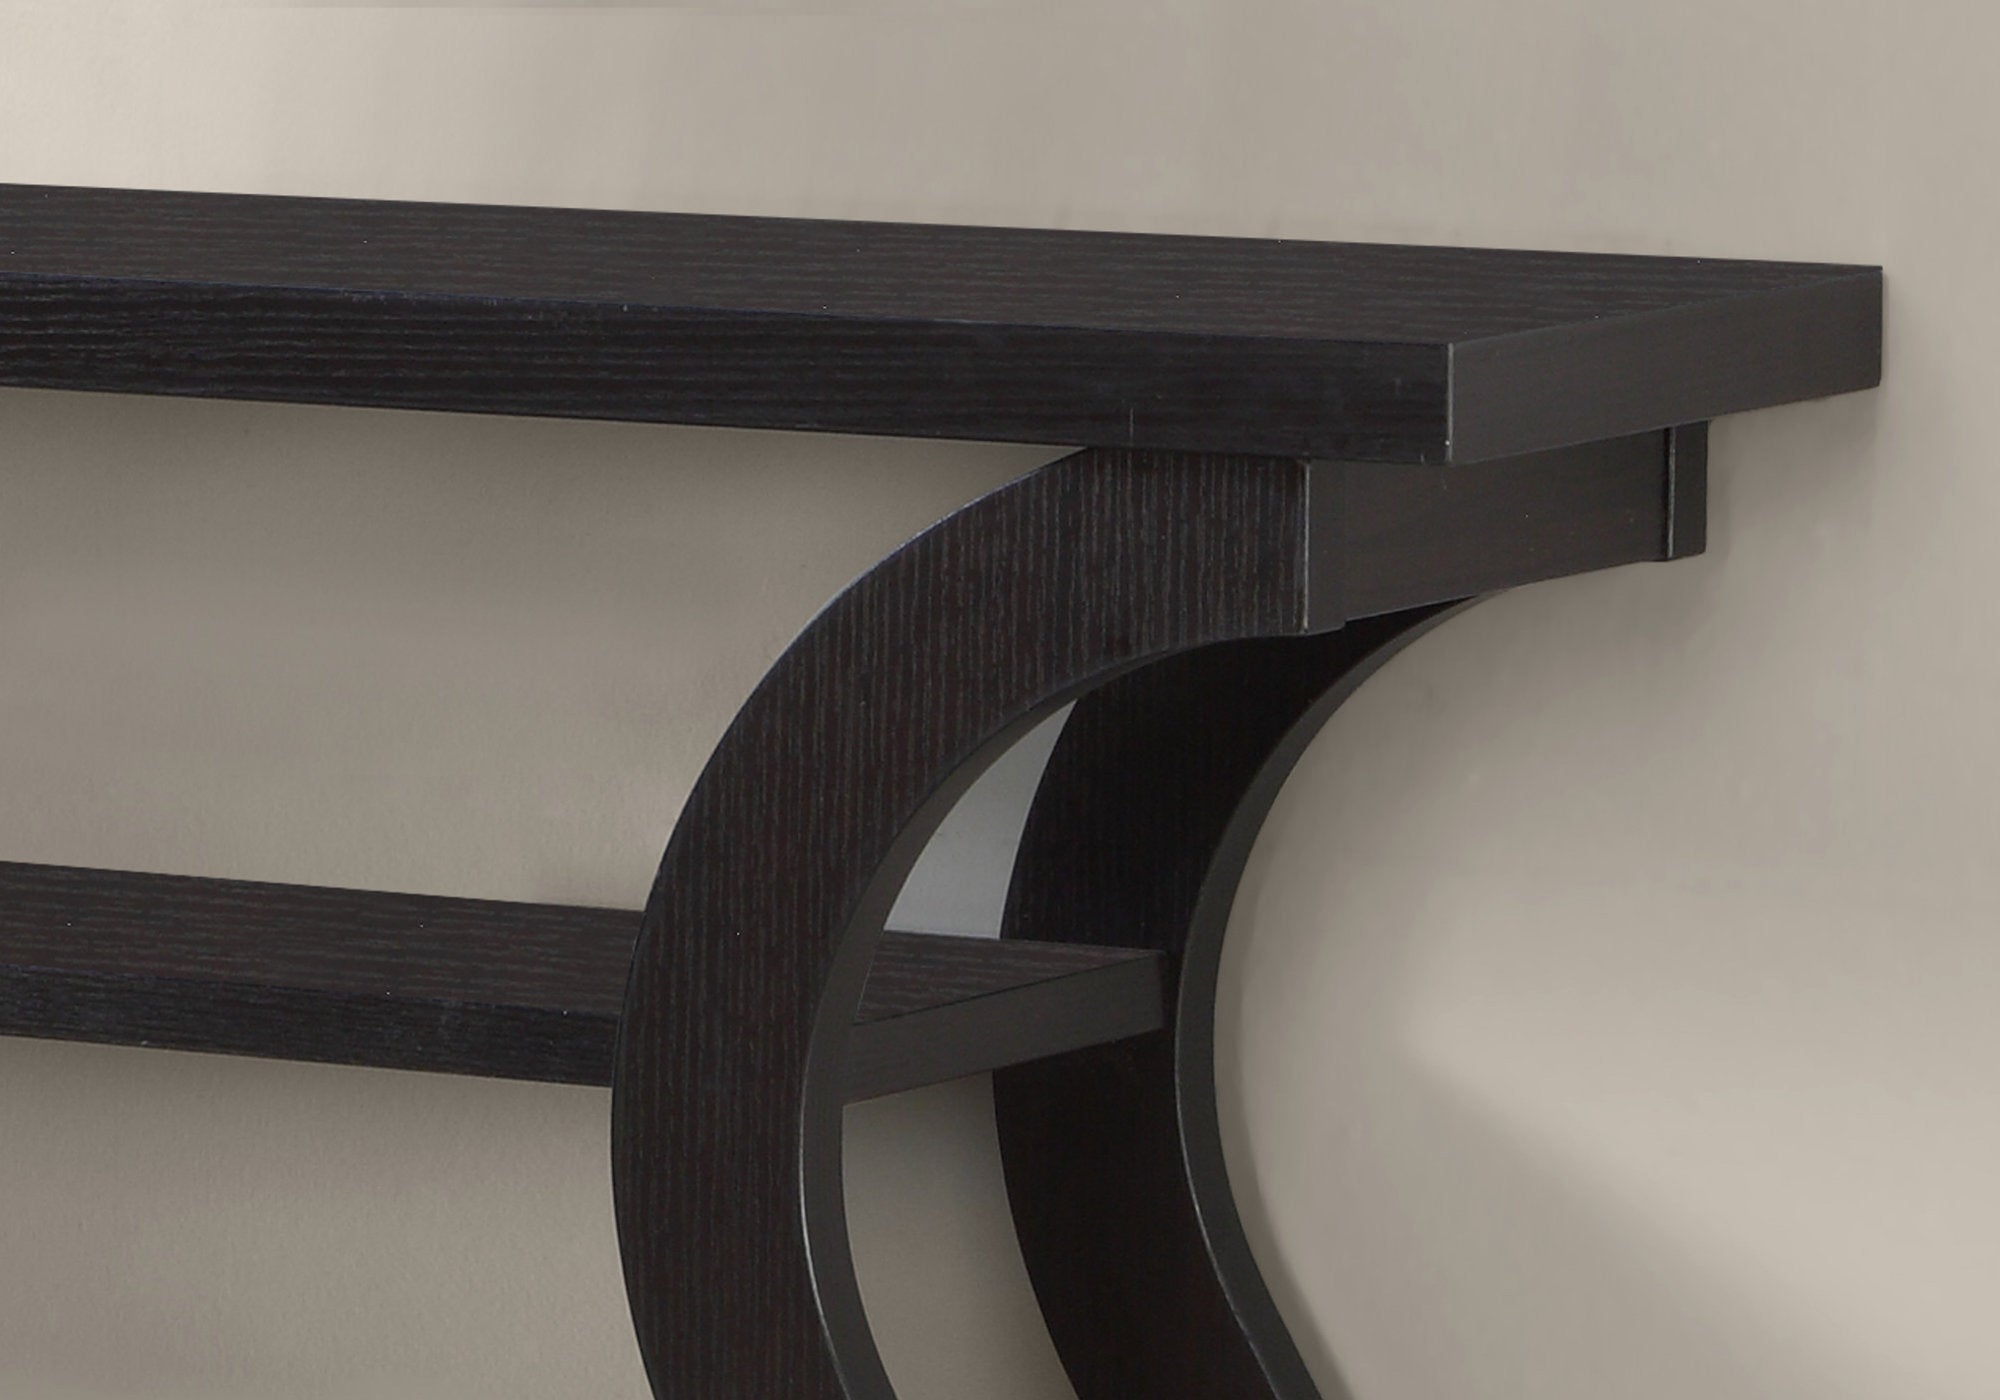 MN-222445    Accent Table, Console, Entryway, Narrow, Sofa, Living Room, Bedroom, Laminate, Dark Brown, Contemporary, Modern